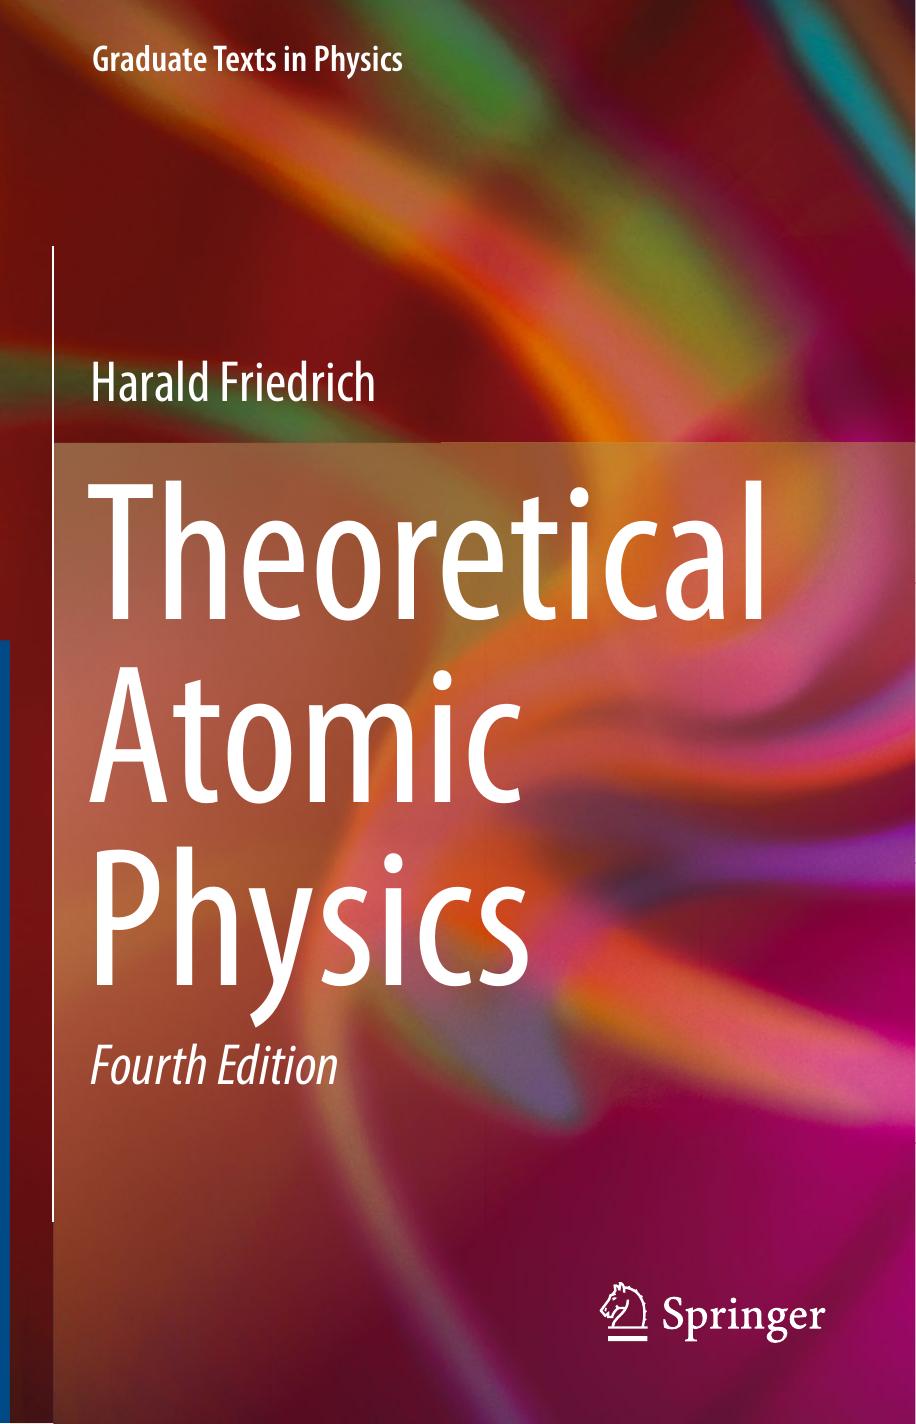 Theoretical Atomic Physics by Harald Friedrich